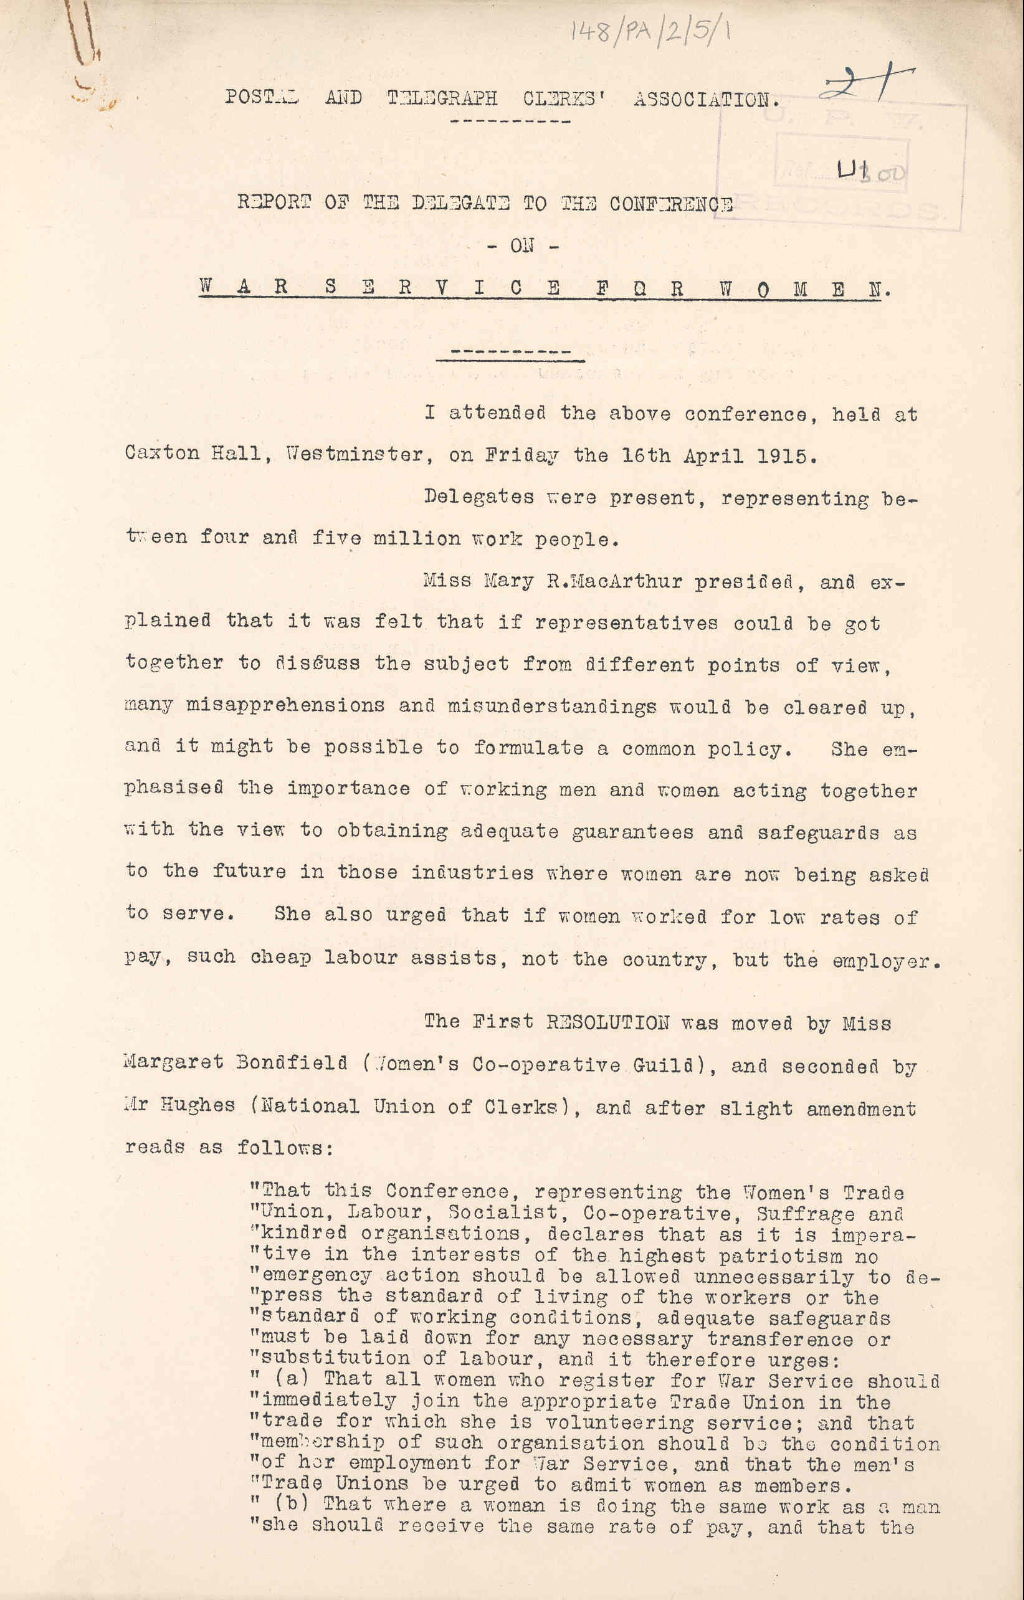 Front page of report of delegate to conference on war service for women